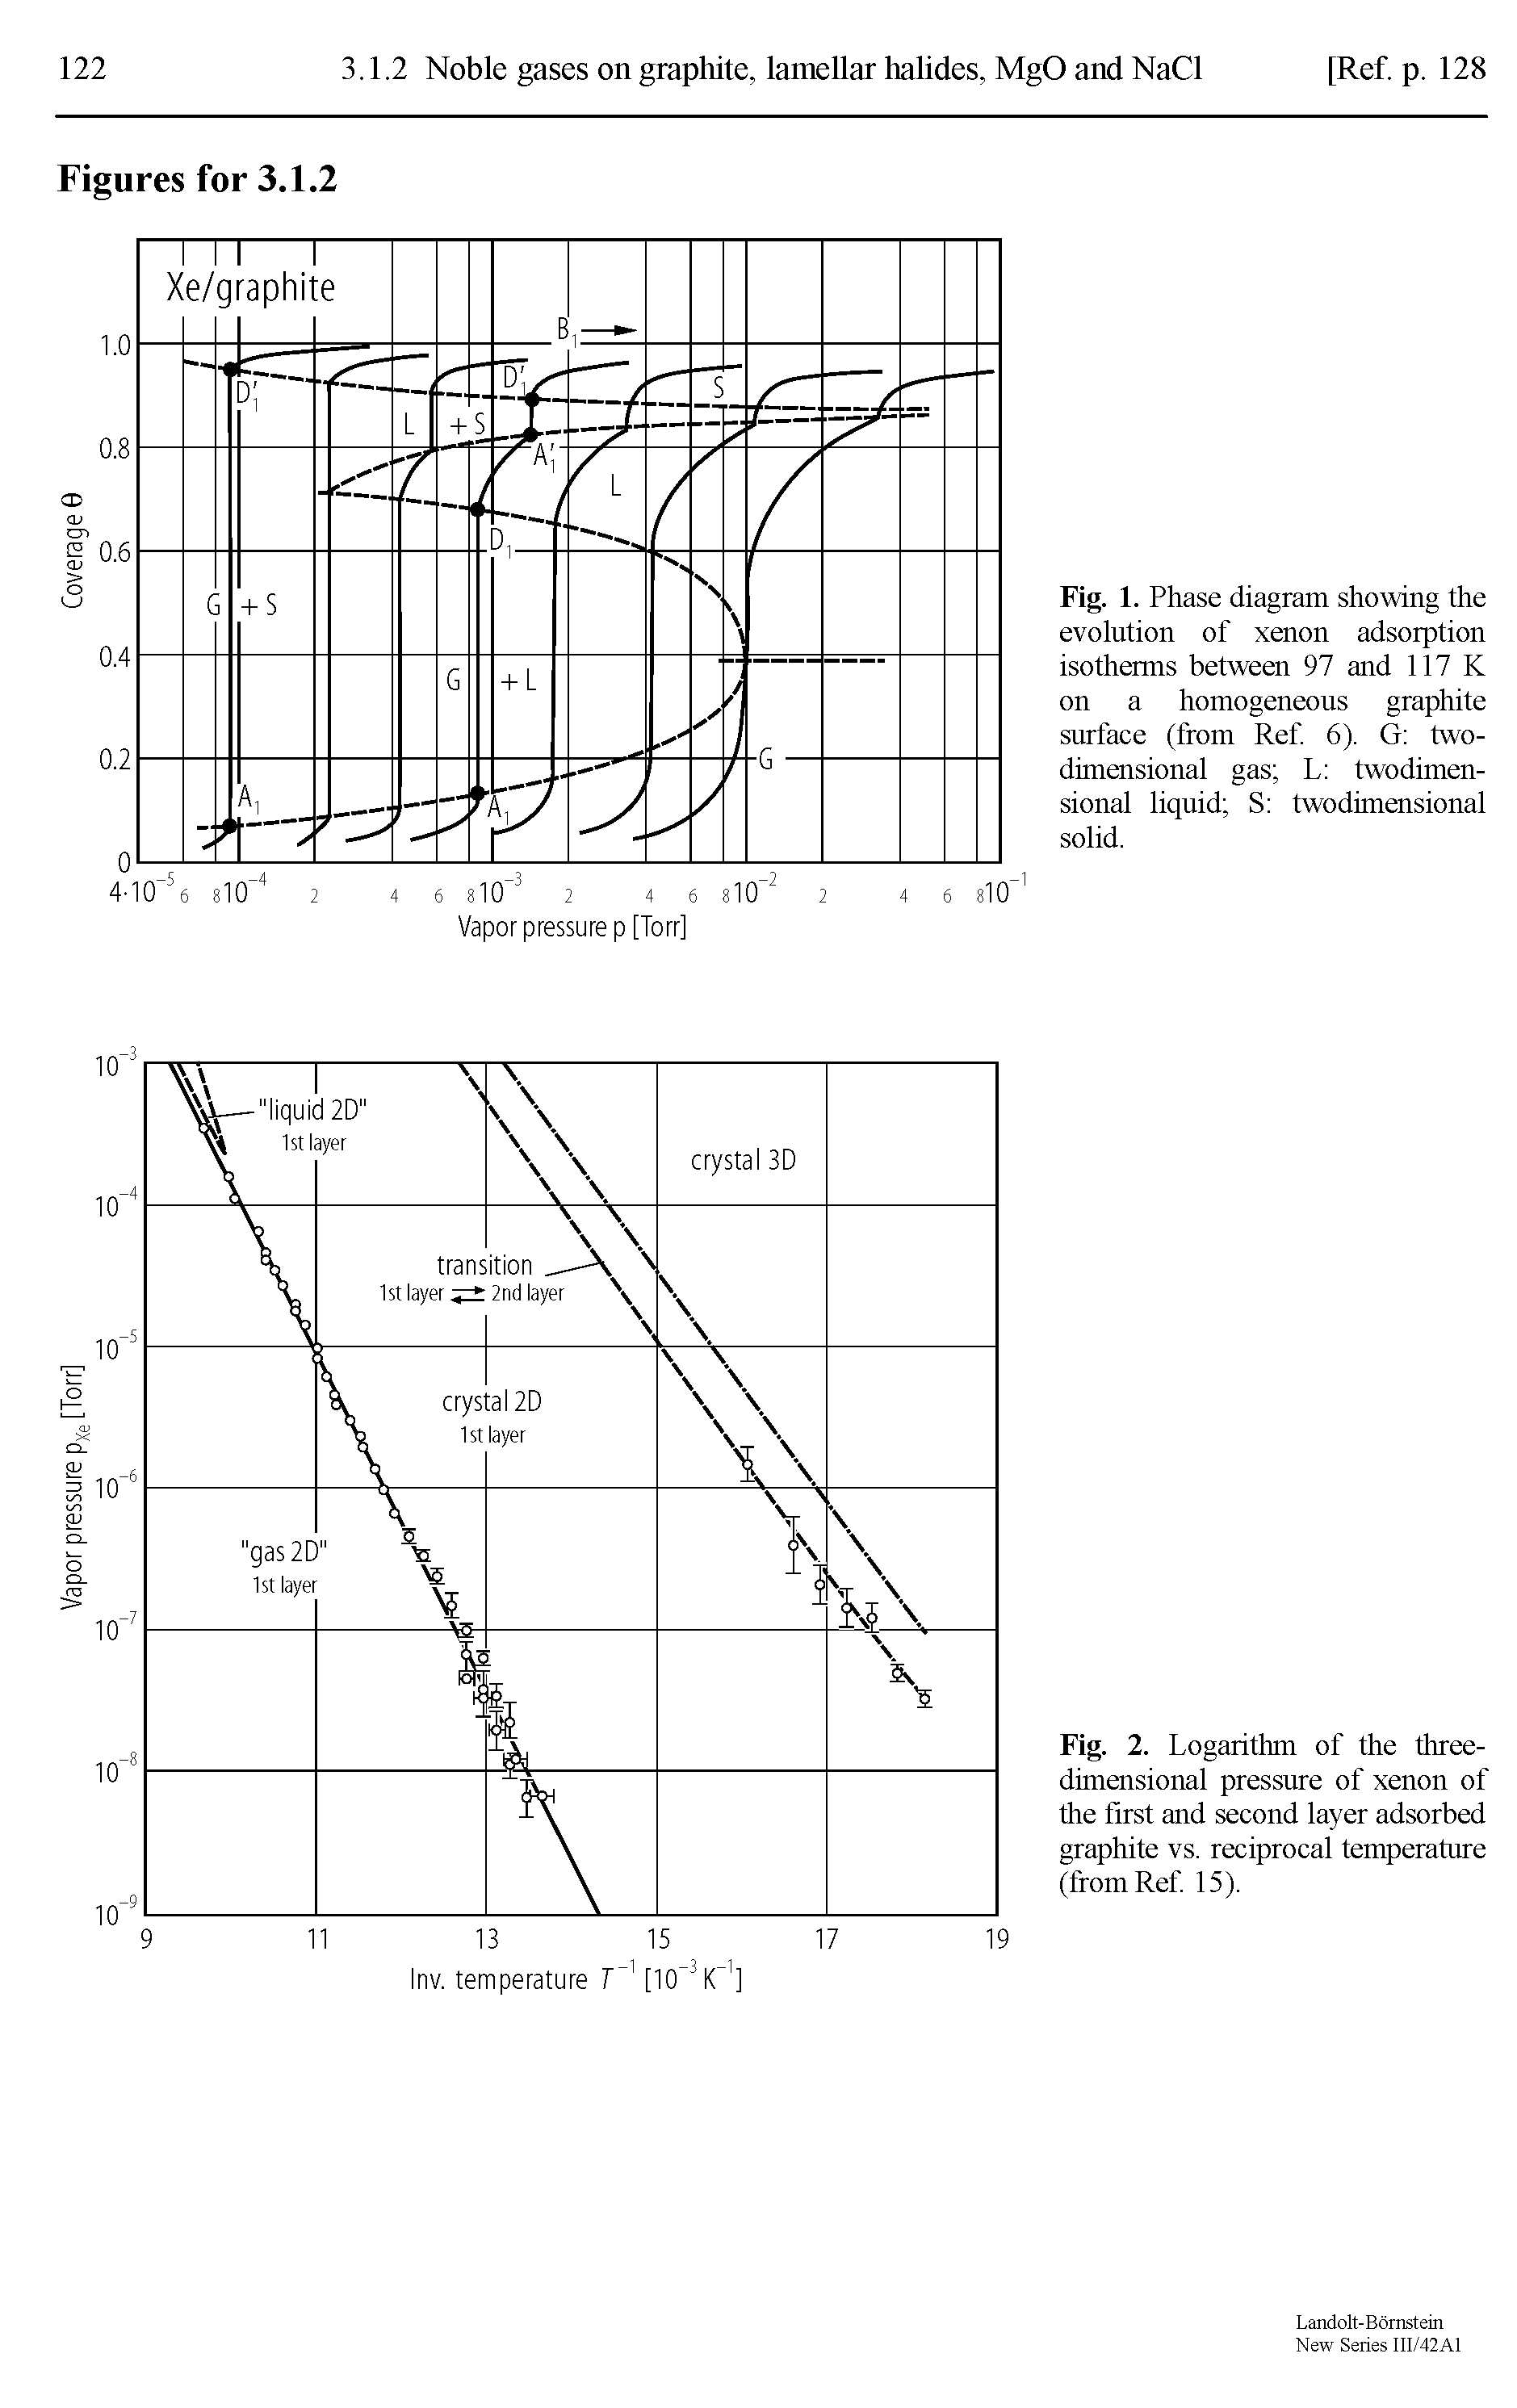 Fig. 2. Logarithm of the three-dimensional pressure of xenon of the first and second layer adsorbed graphite vs. reciprocal temperature (from Ref 15).